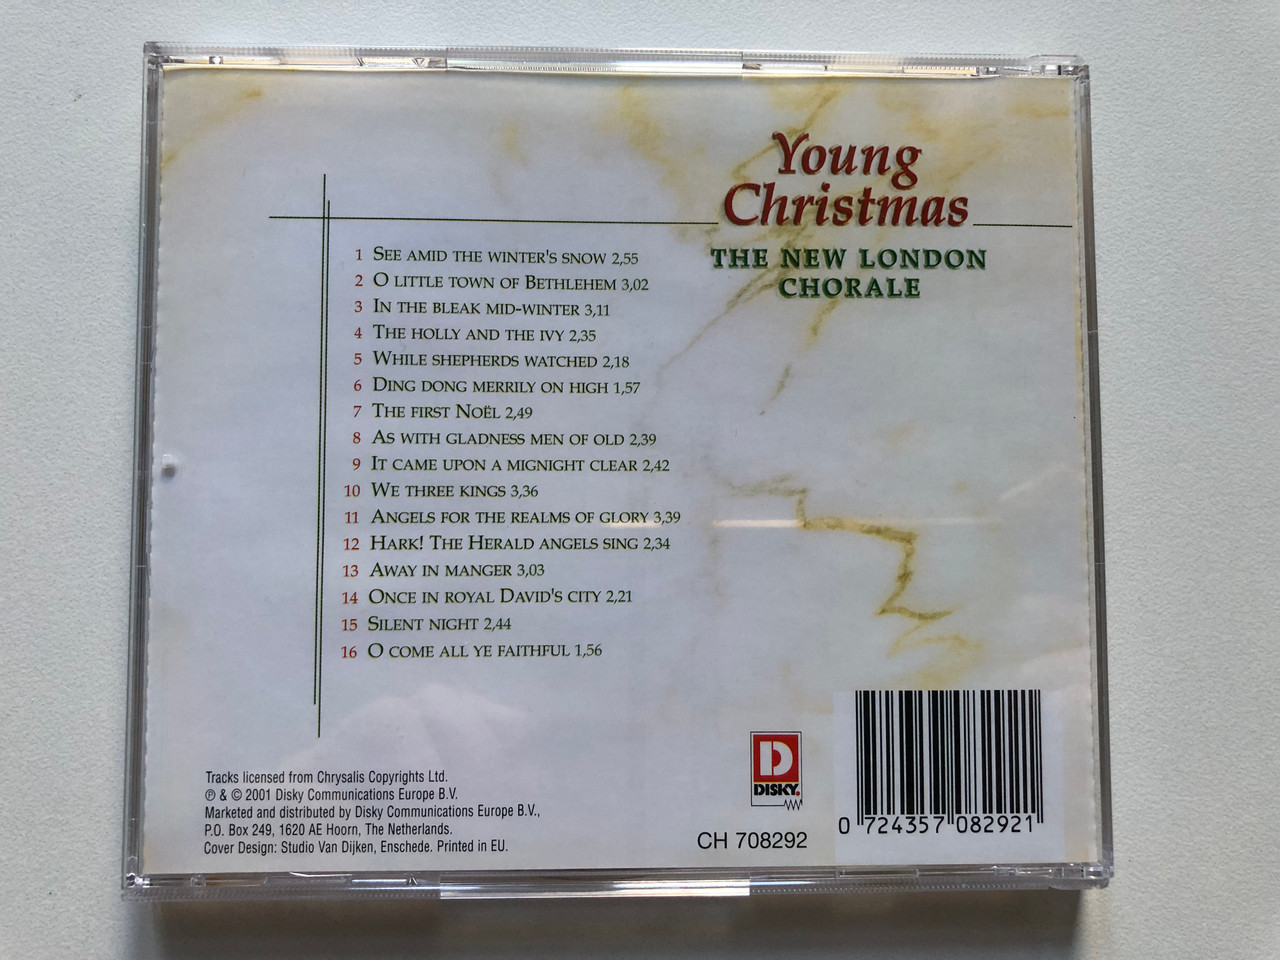 https://cdn10.bigcommerce.com/s-62bdpkt7pb/products/0/images/307431/Young_Christmas_The_New_London_Chorale_-_Conducted_By_Tom_Parker_Disky_Audio_CD_2001_CH_708292_2__89329.1698659477.1280.1280.JPG?c=2